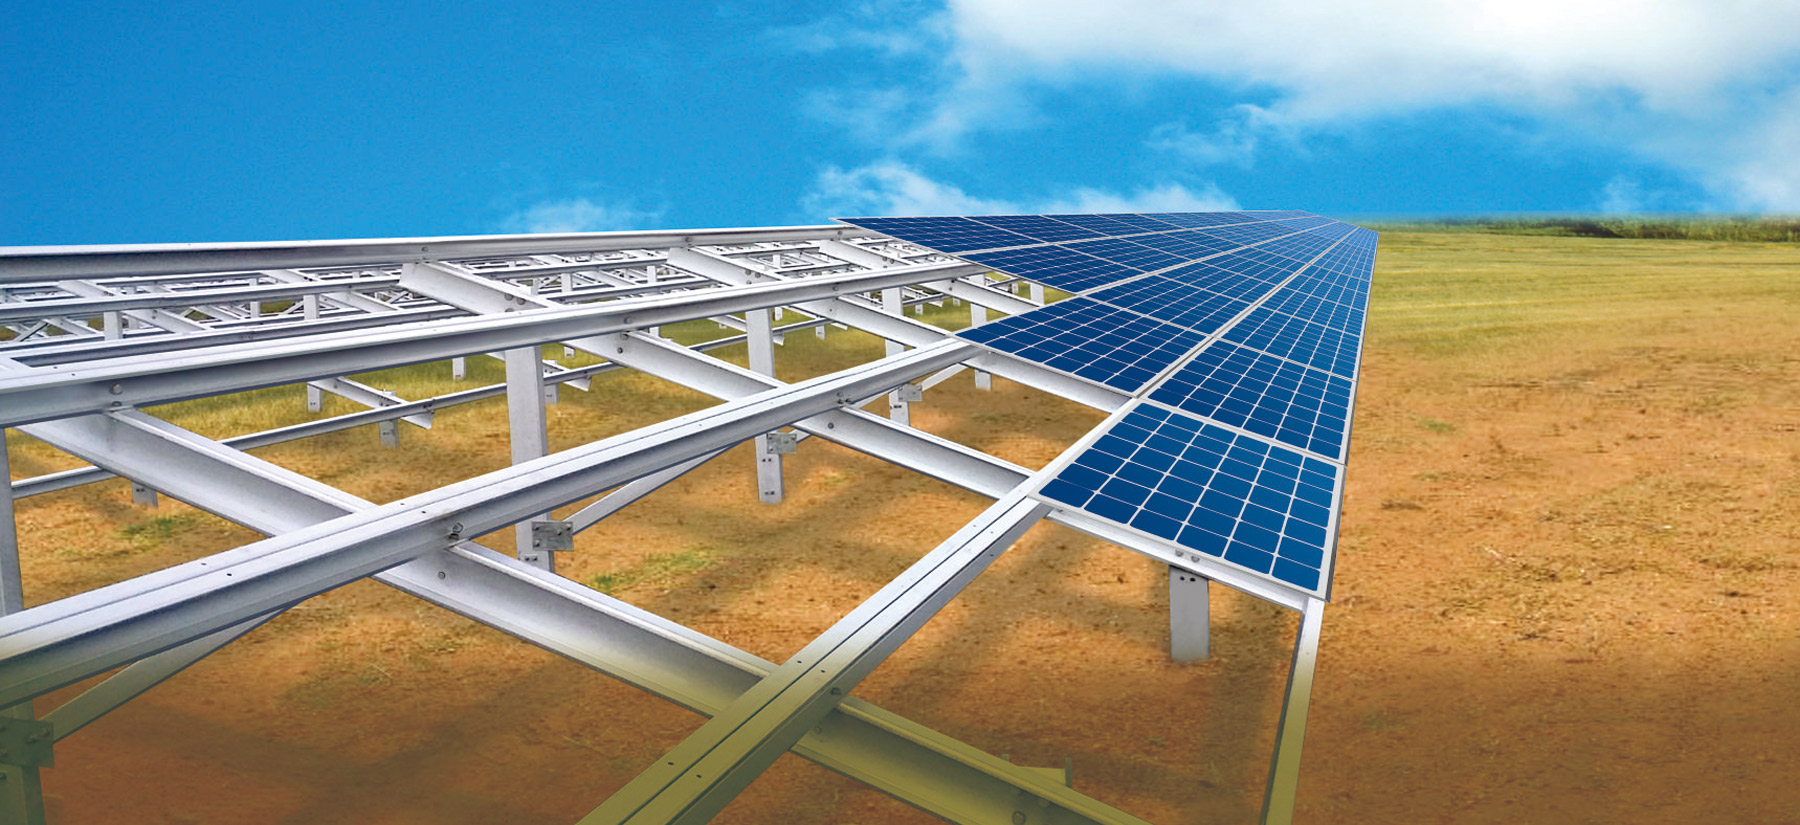 What to Look for When Choosing a Solar Mounting System